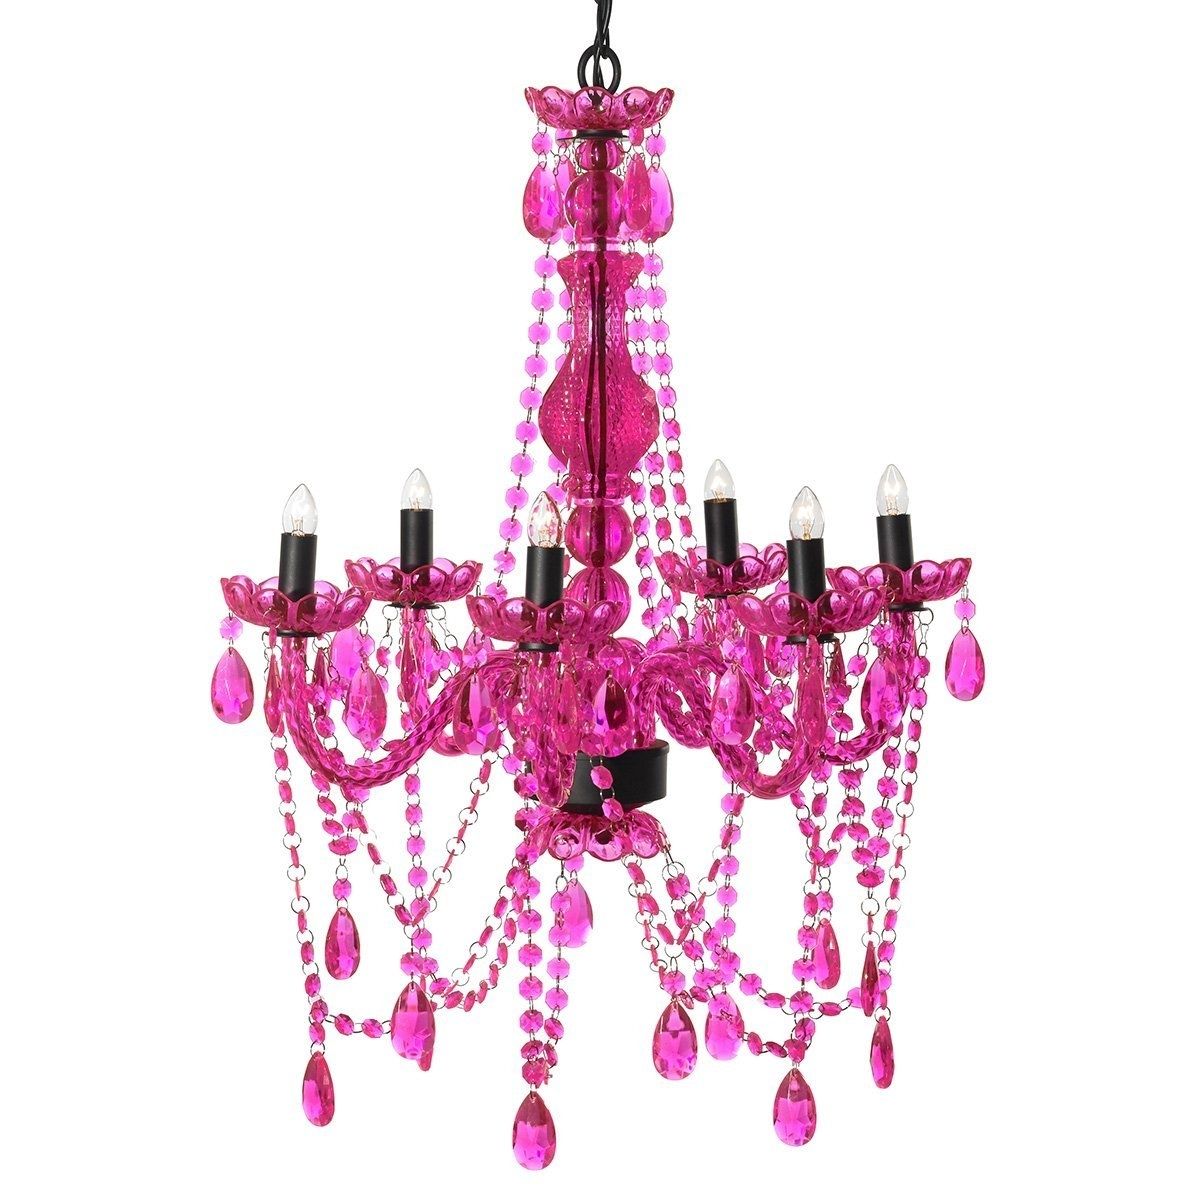 Amazon: 3c4g Chandelier, Hot Pink: Home & Kitchen Intended For Newest Pink Plastic Chandeliers (View 2 of 15)